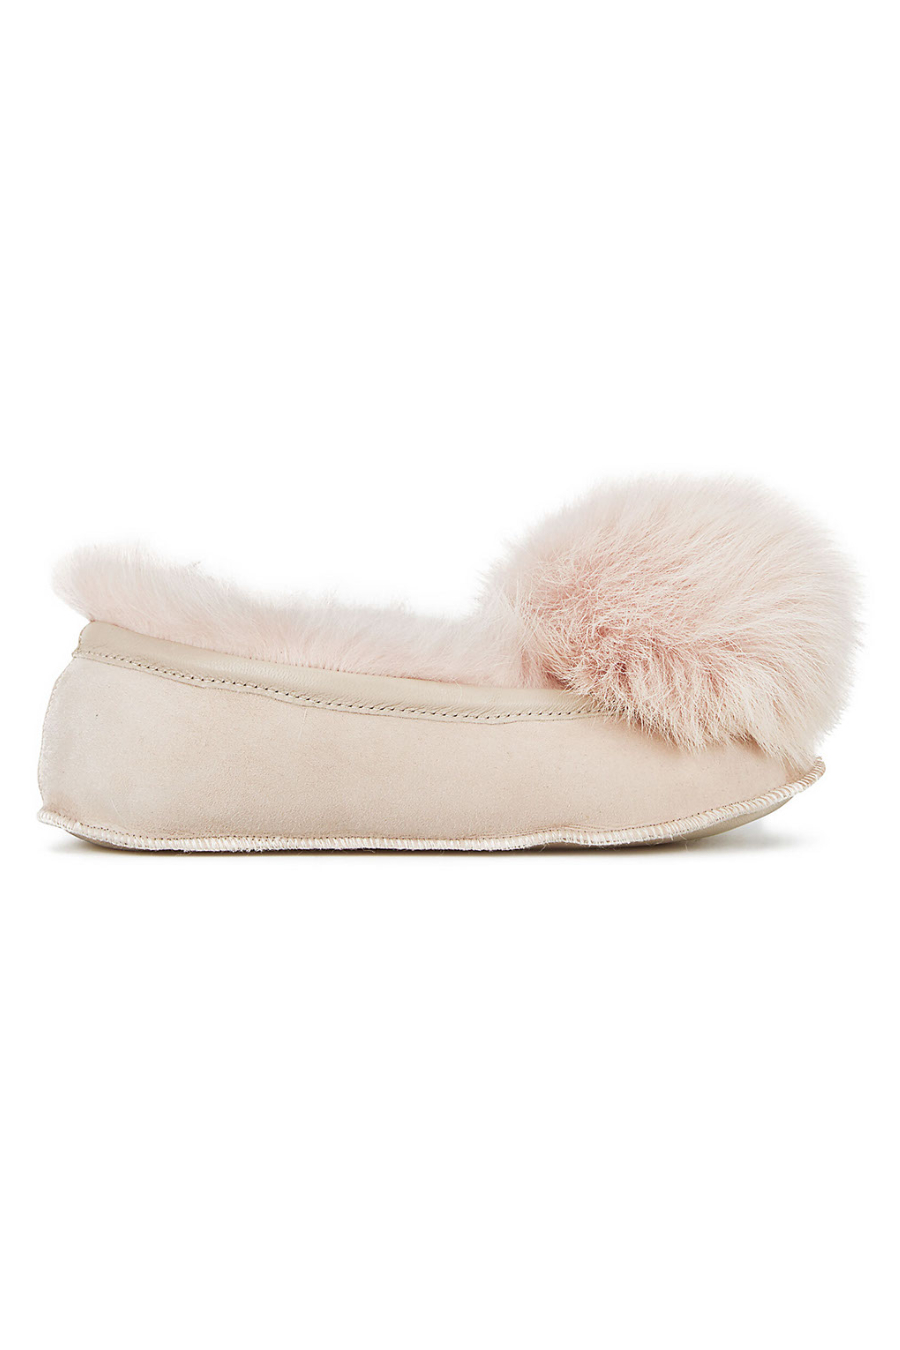 gushlow-and-cole-shearling-ballet-slippers-7-3